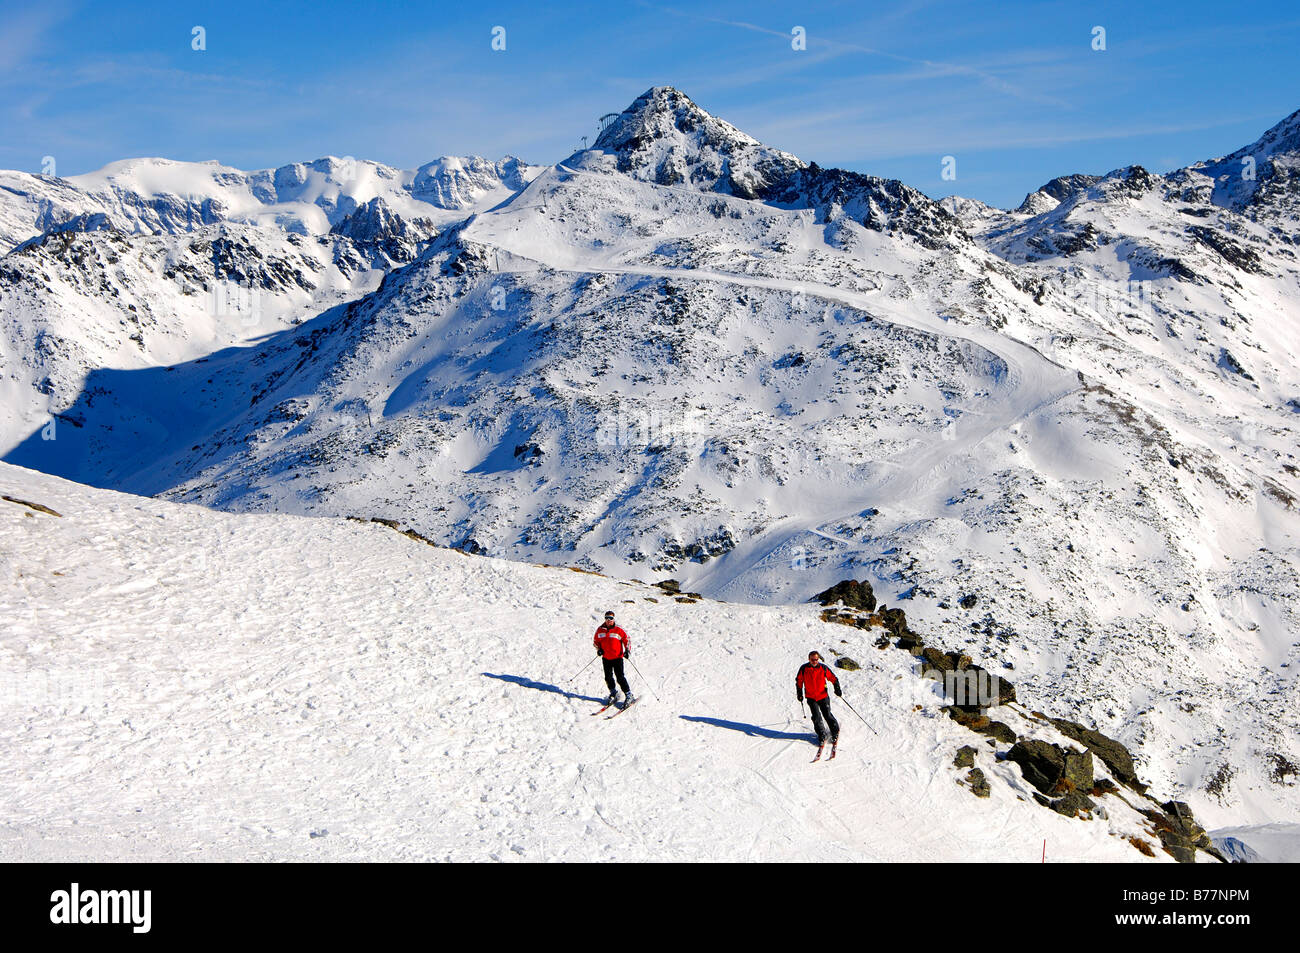 Skiers in front of the zig-zag shaped ski slope at Mont du Vallon, Meribel, skiing area Trois Vallees, France, Europe Stock Photo